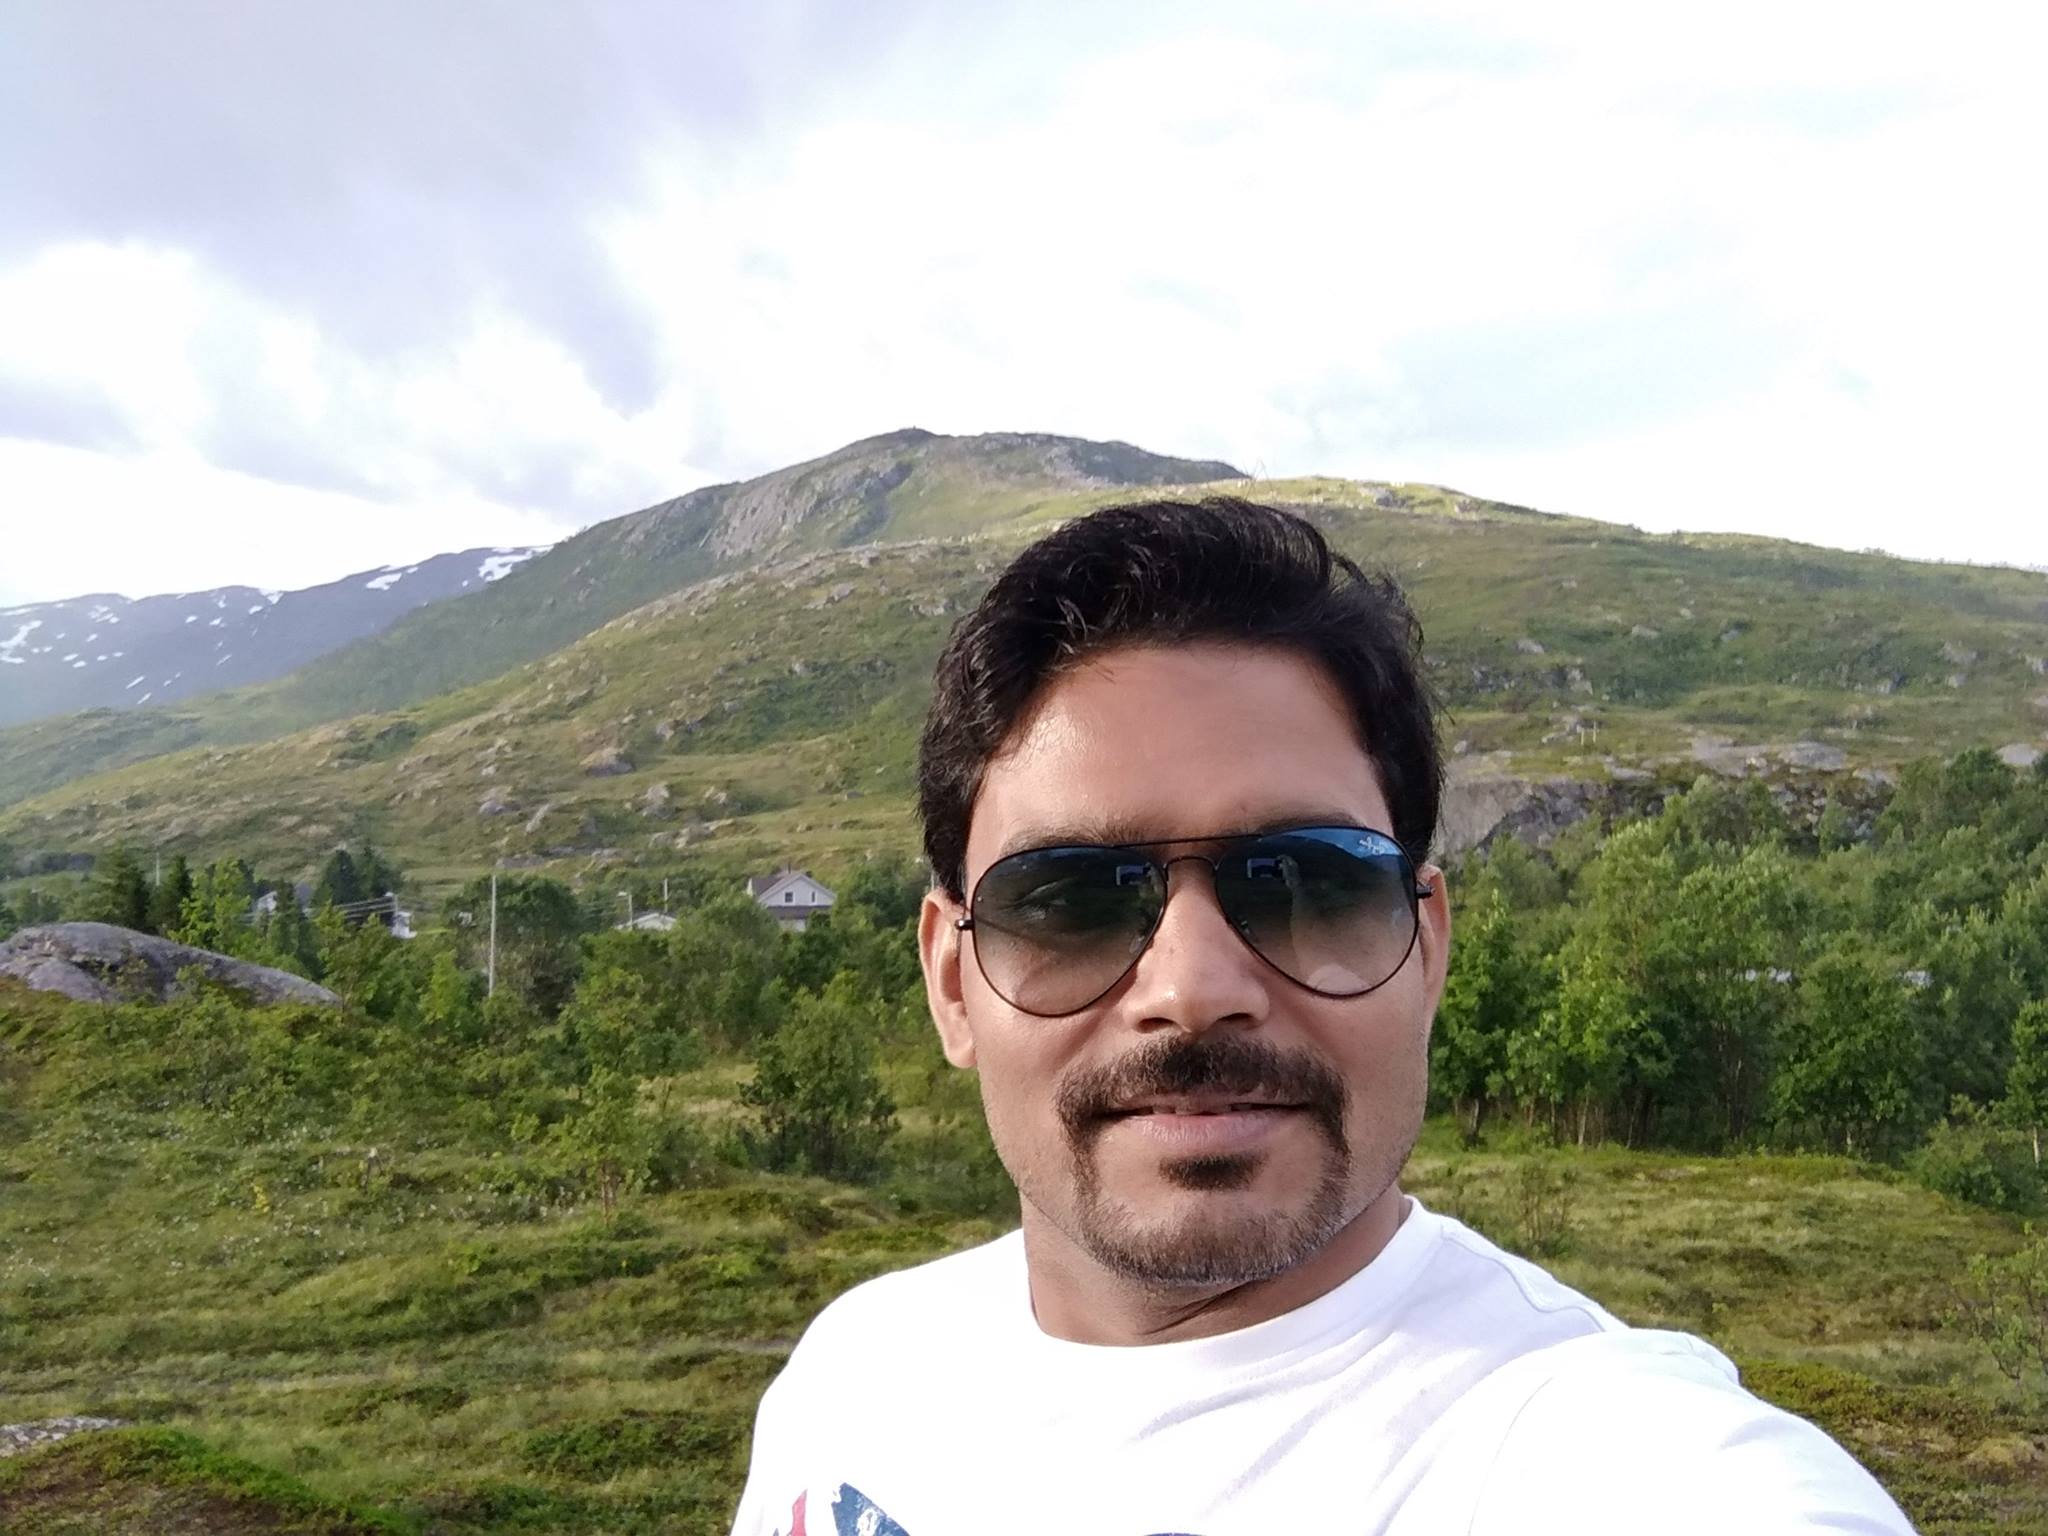 An Indian man with a well-groomed mustache and beard wearing sunglasses in front of a mountain